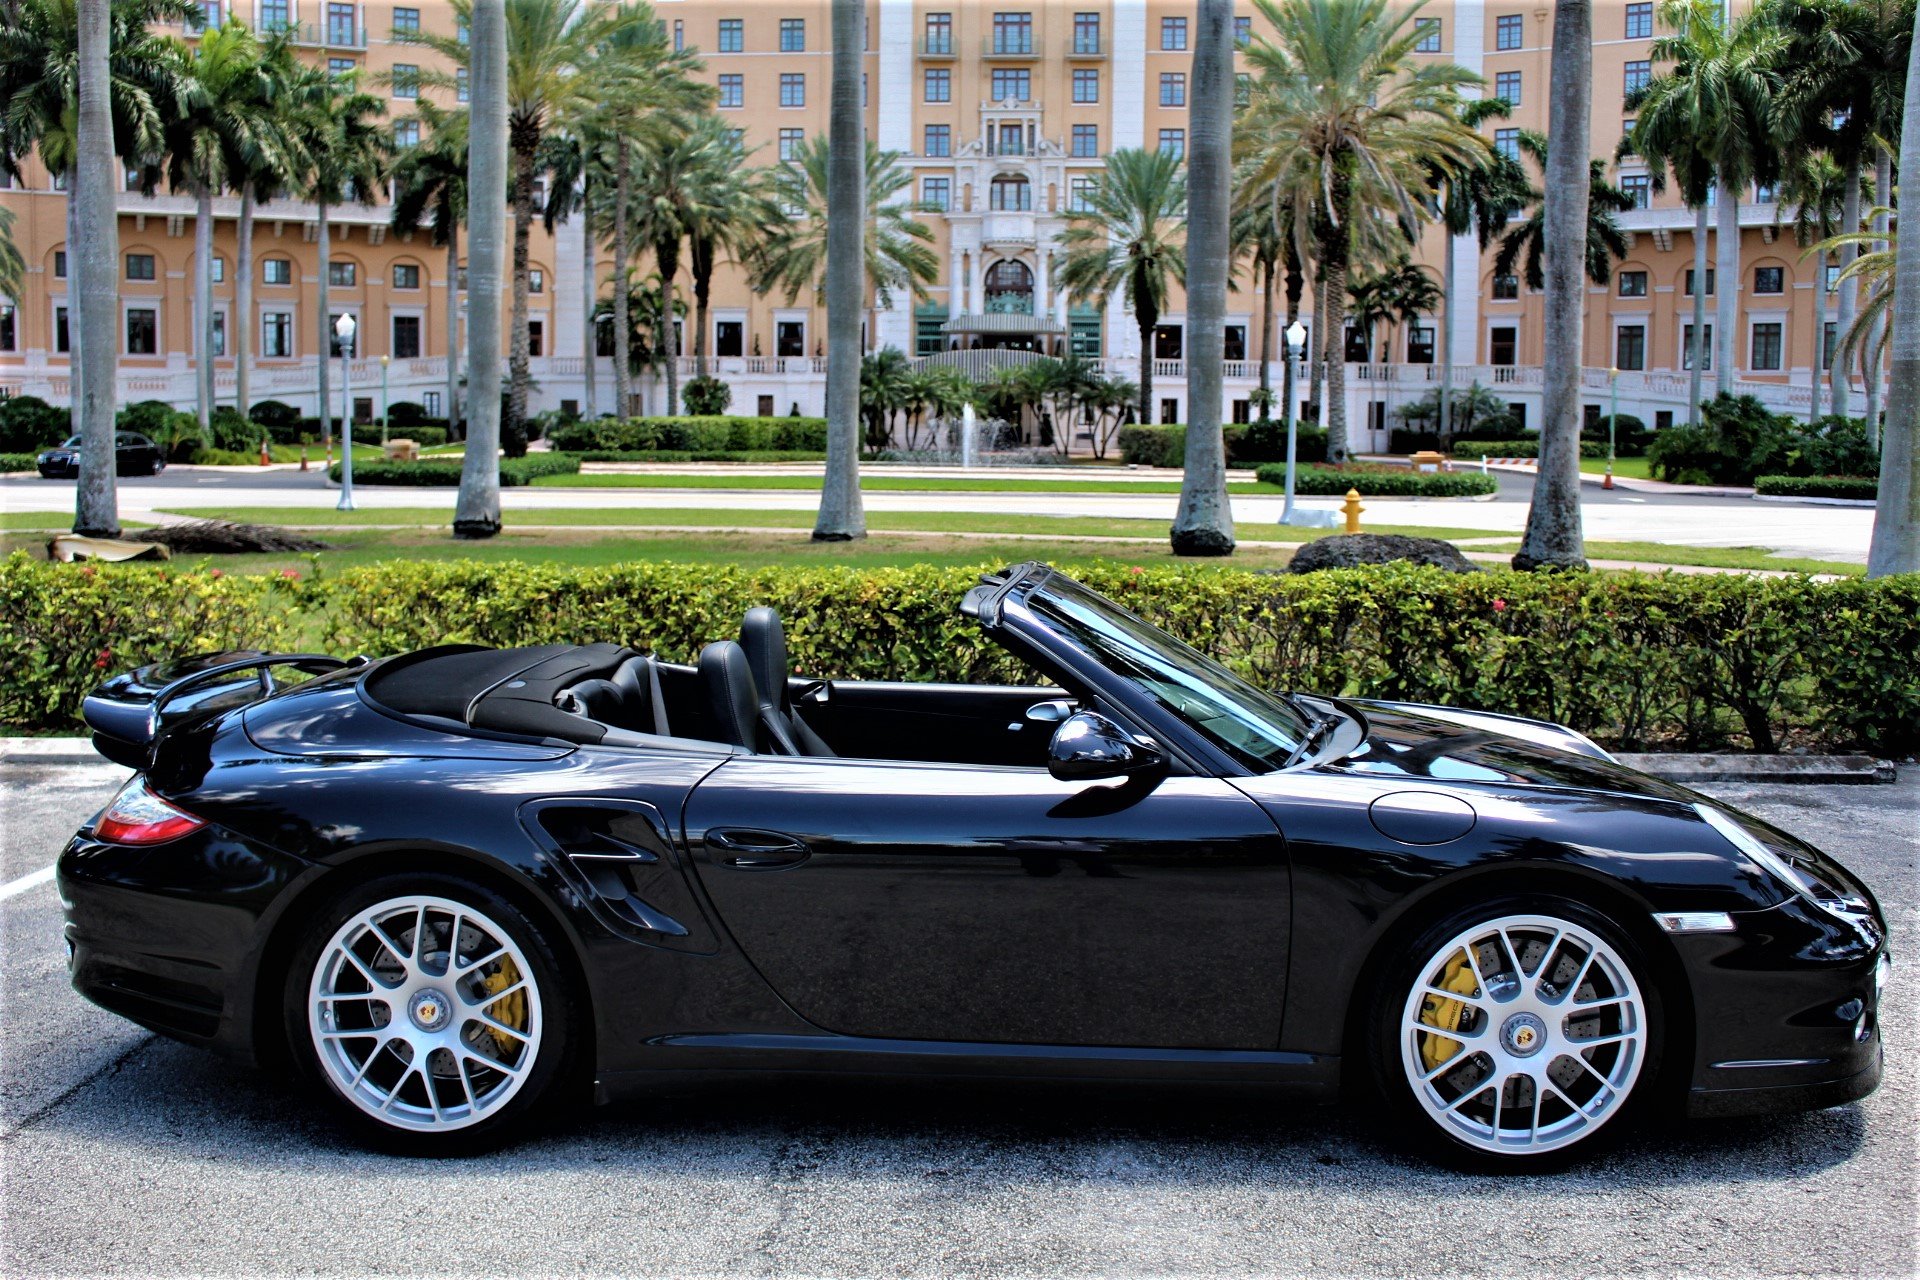 Used 2011 Porsche 911 Turbo S for sale Sold at The Gables Sports Cars in Miami FL 33146 2